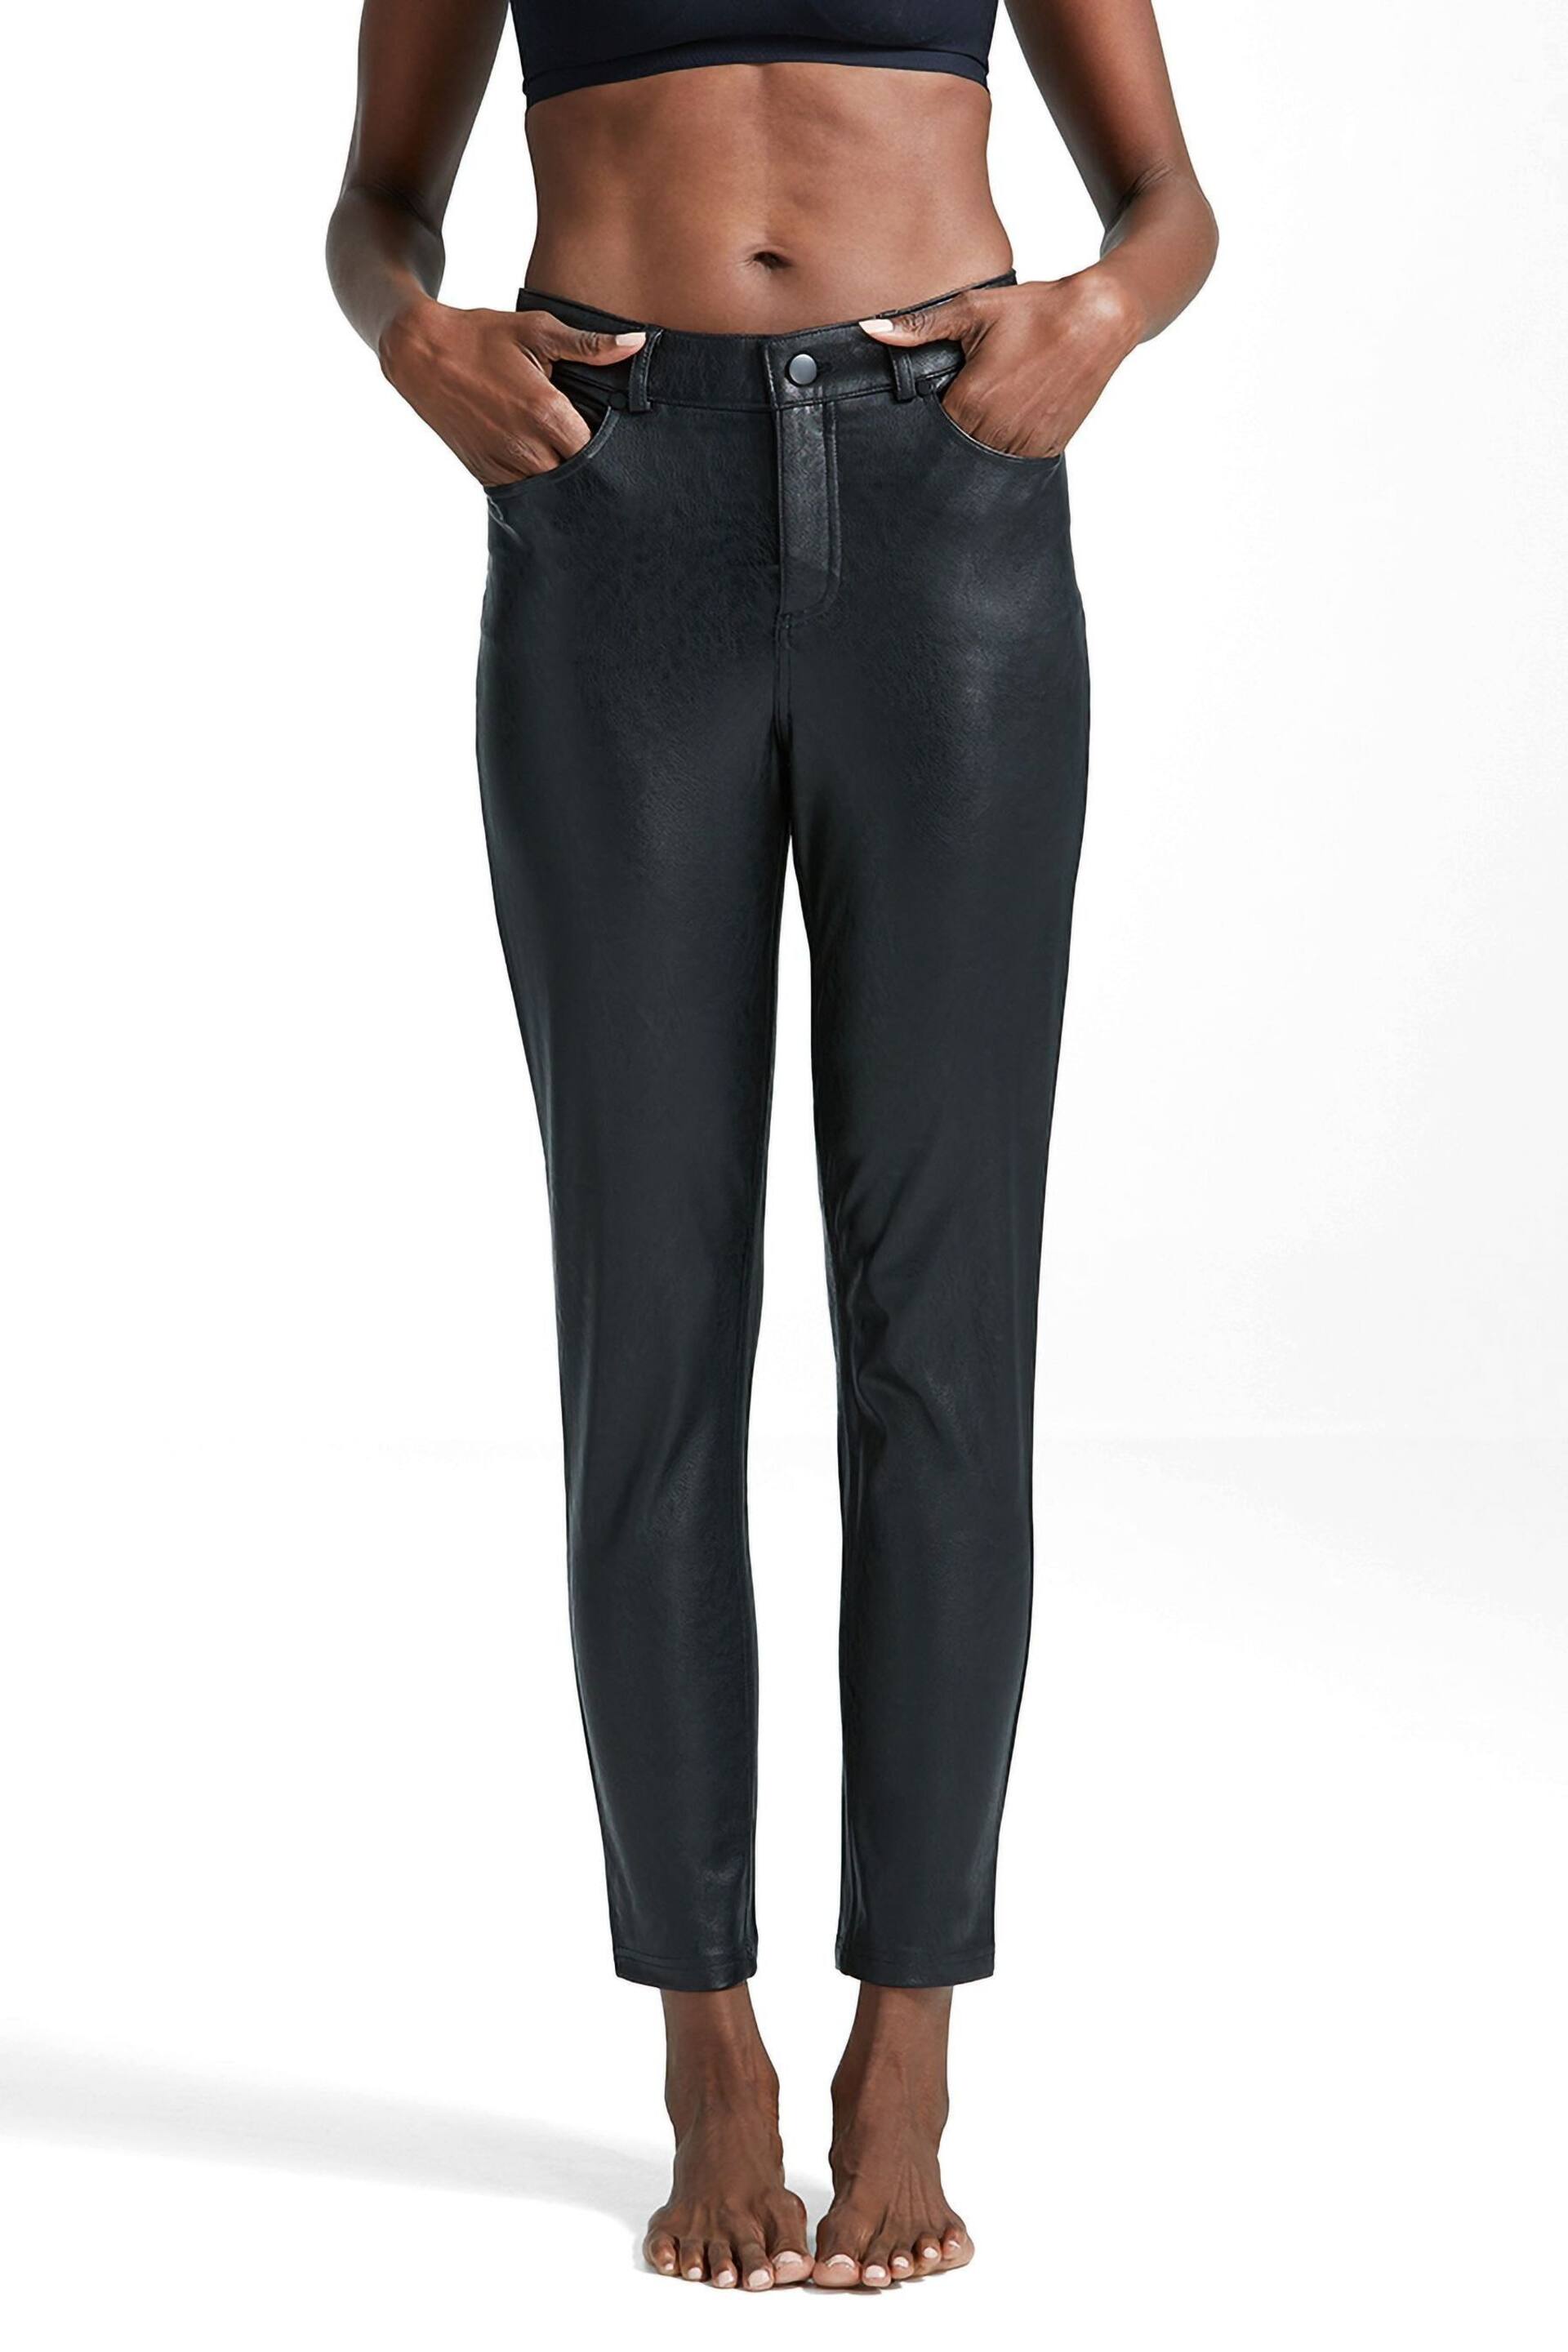 Commando 5 Pocket Faux Leather Trousers - Image 1 of 4